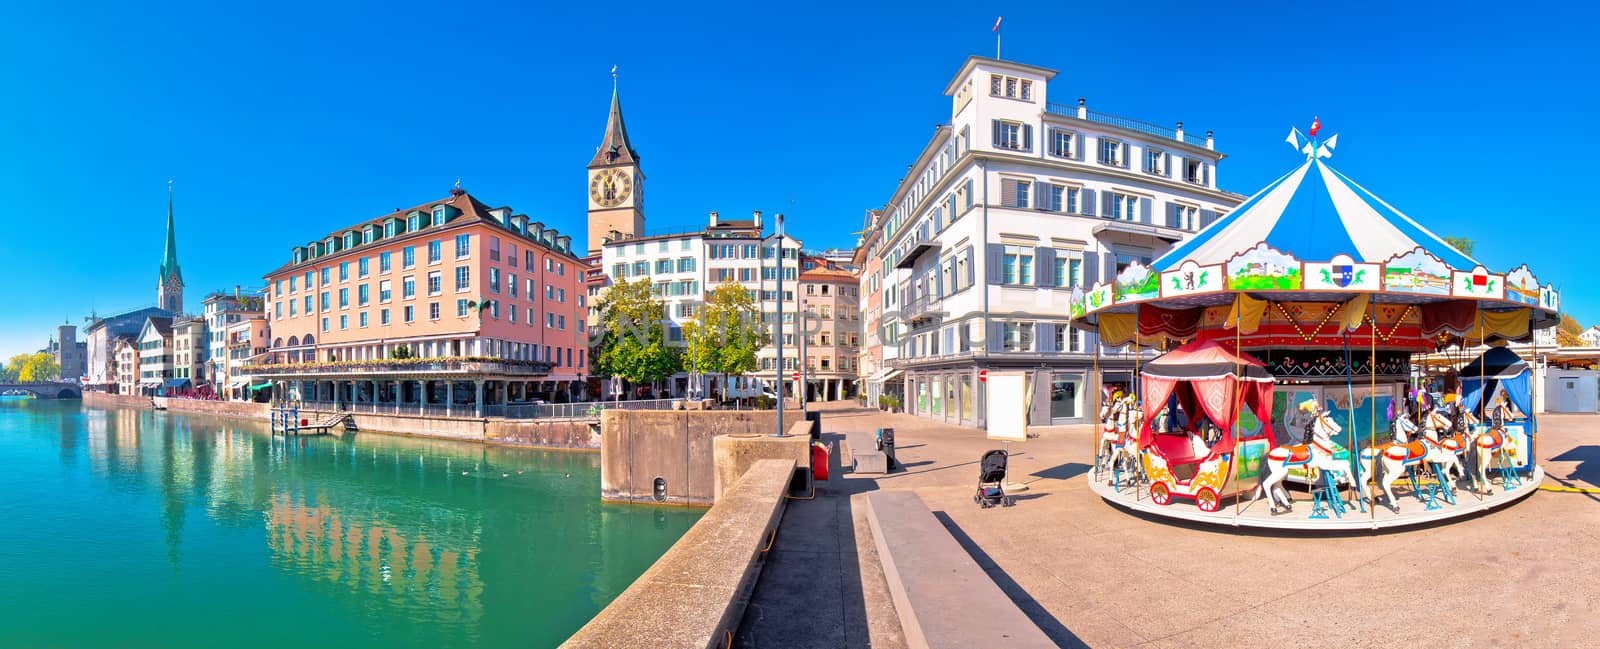 Zurich and Limmat river waterfront colorful panorama by xbrchx